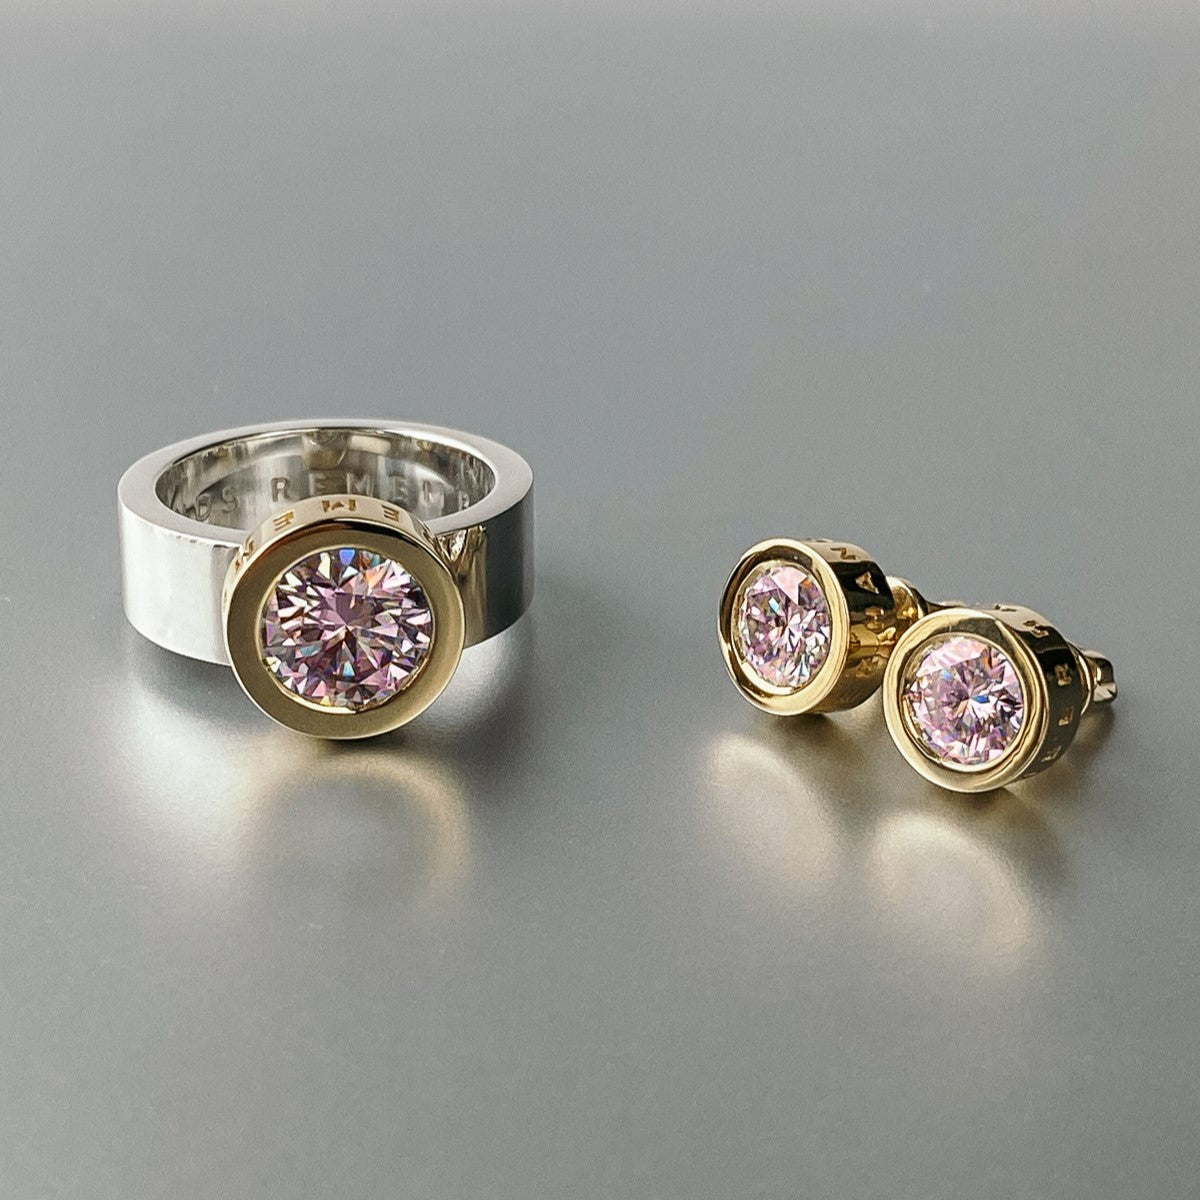 SET "STONE BALL" WITH MORGANITE | SOLID GOLD & SILVER